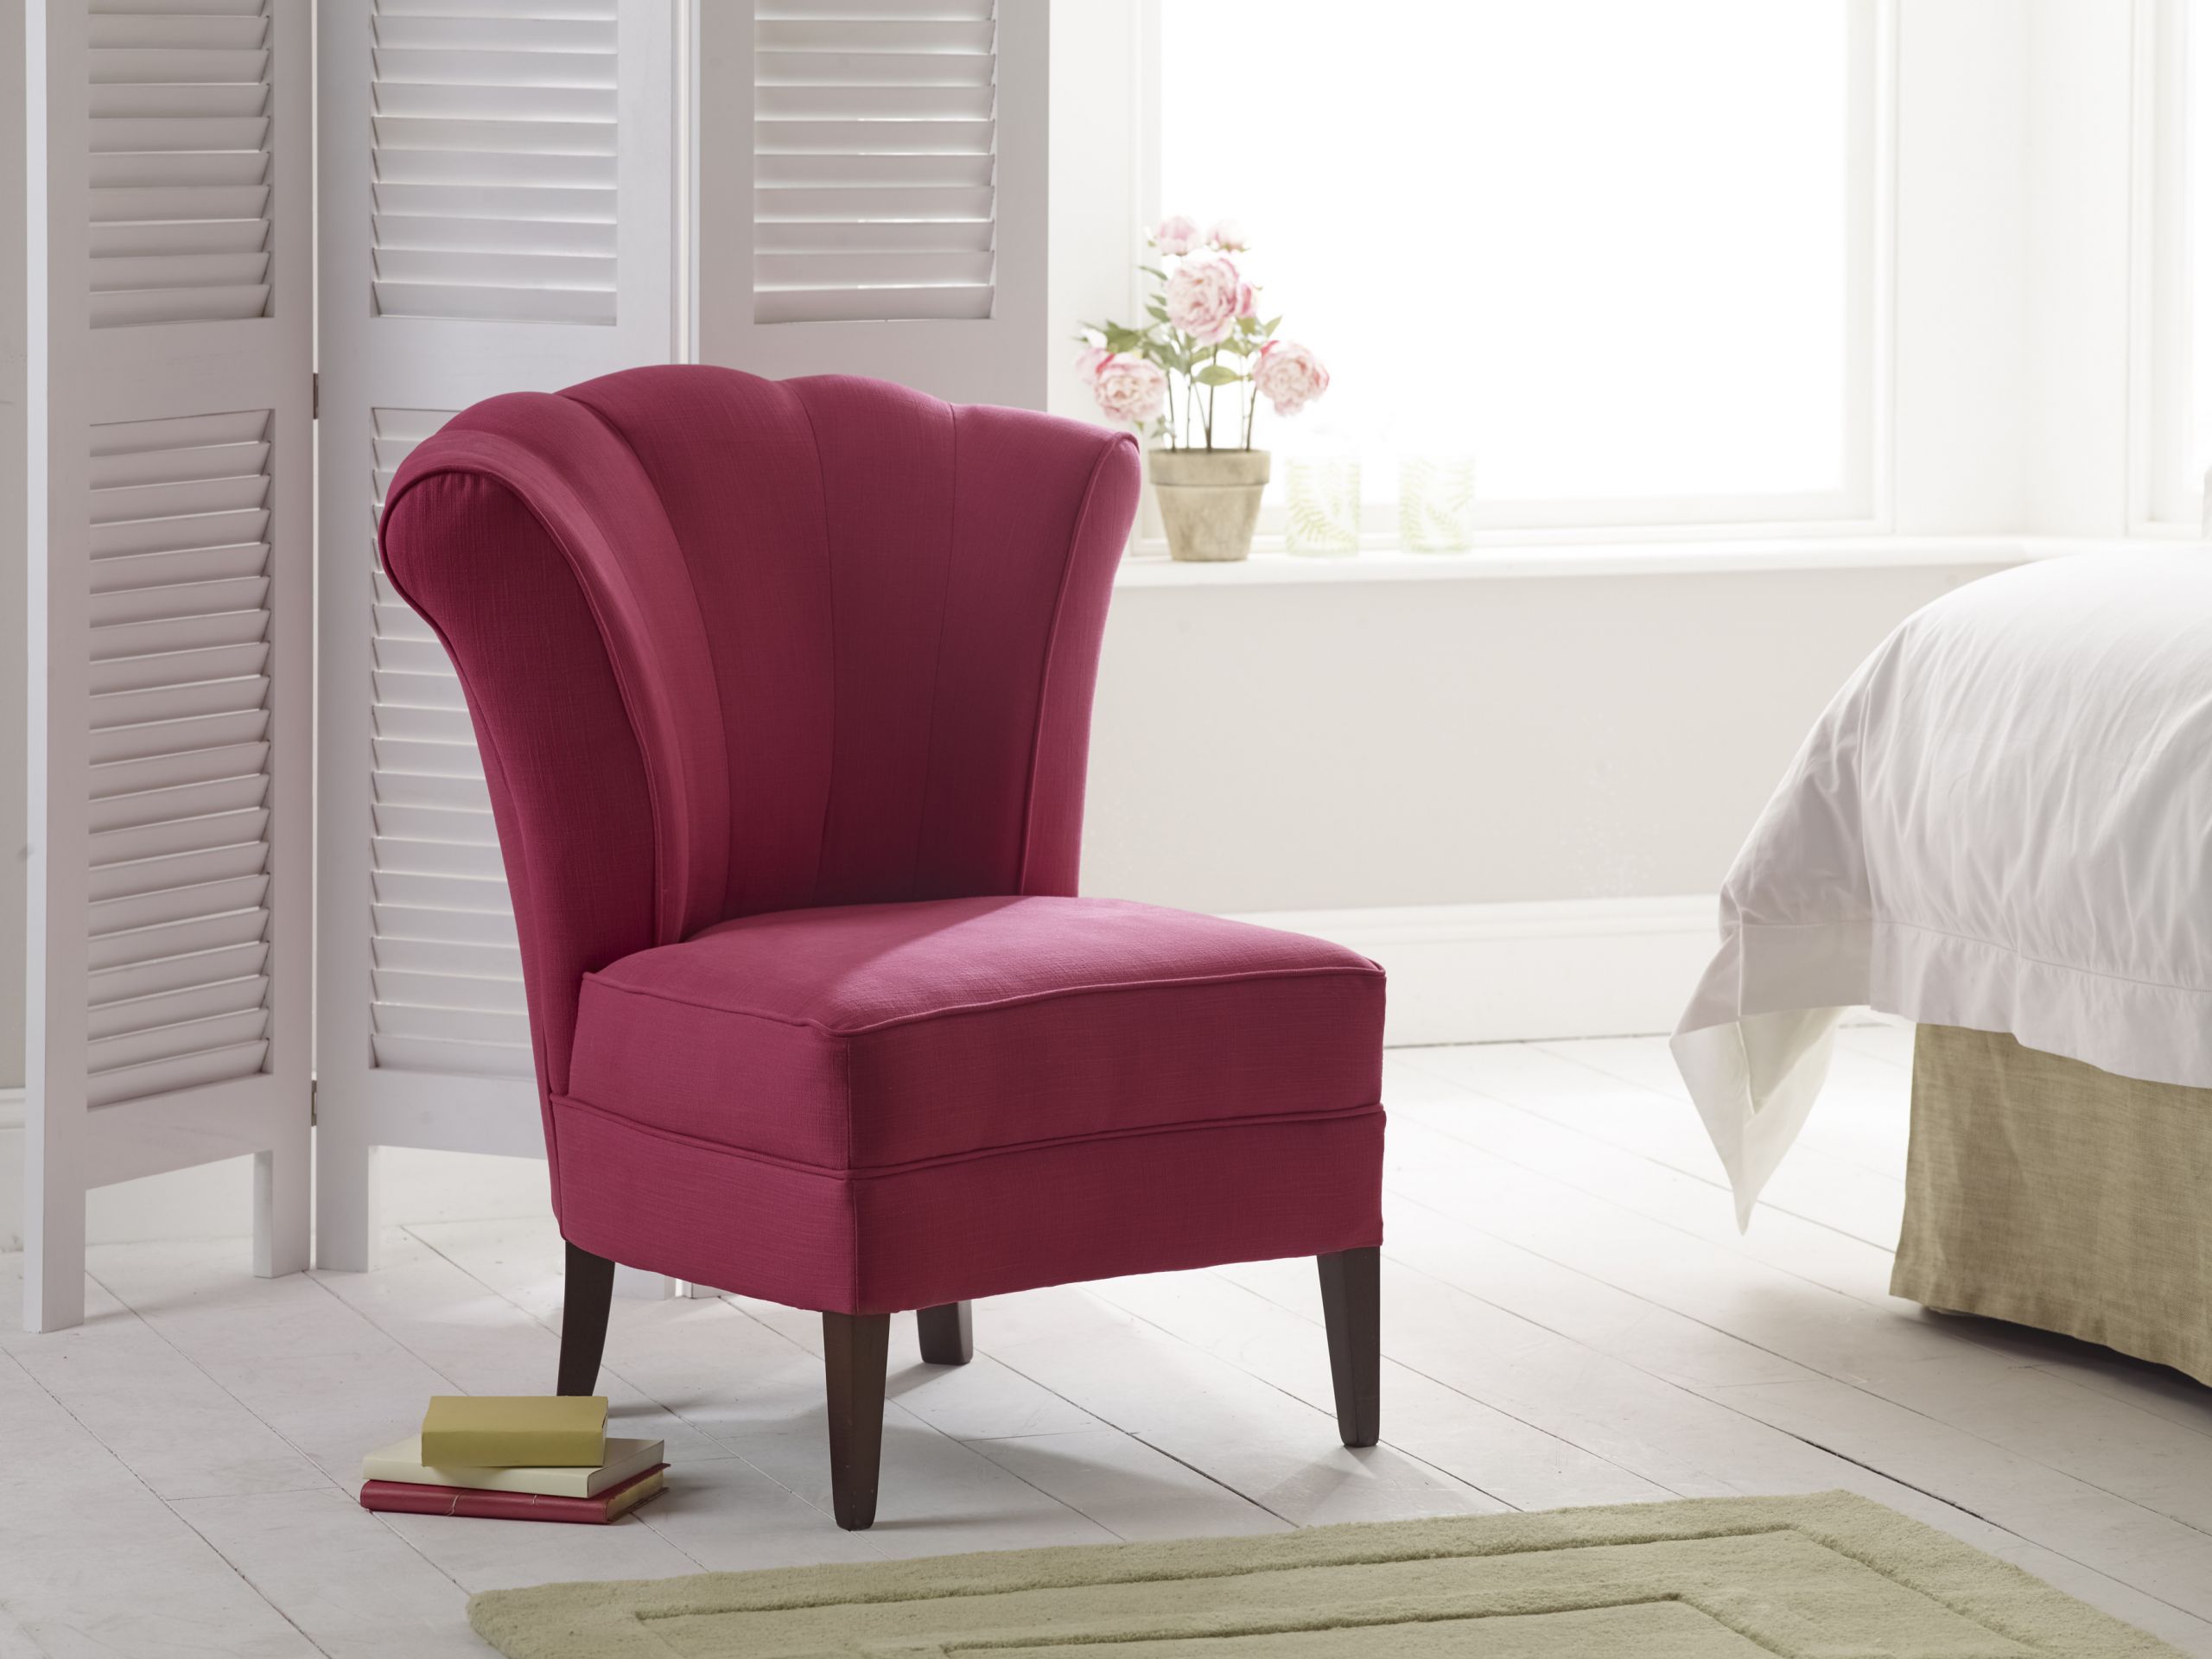 Small Upholstered Chair For Bedroom
 The 24 Best Boudoir Chairs Uk SFConfelca Homes